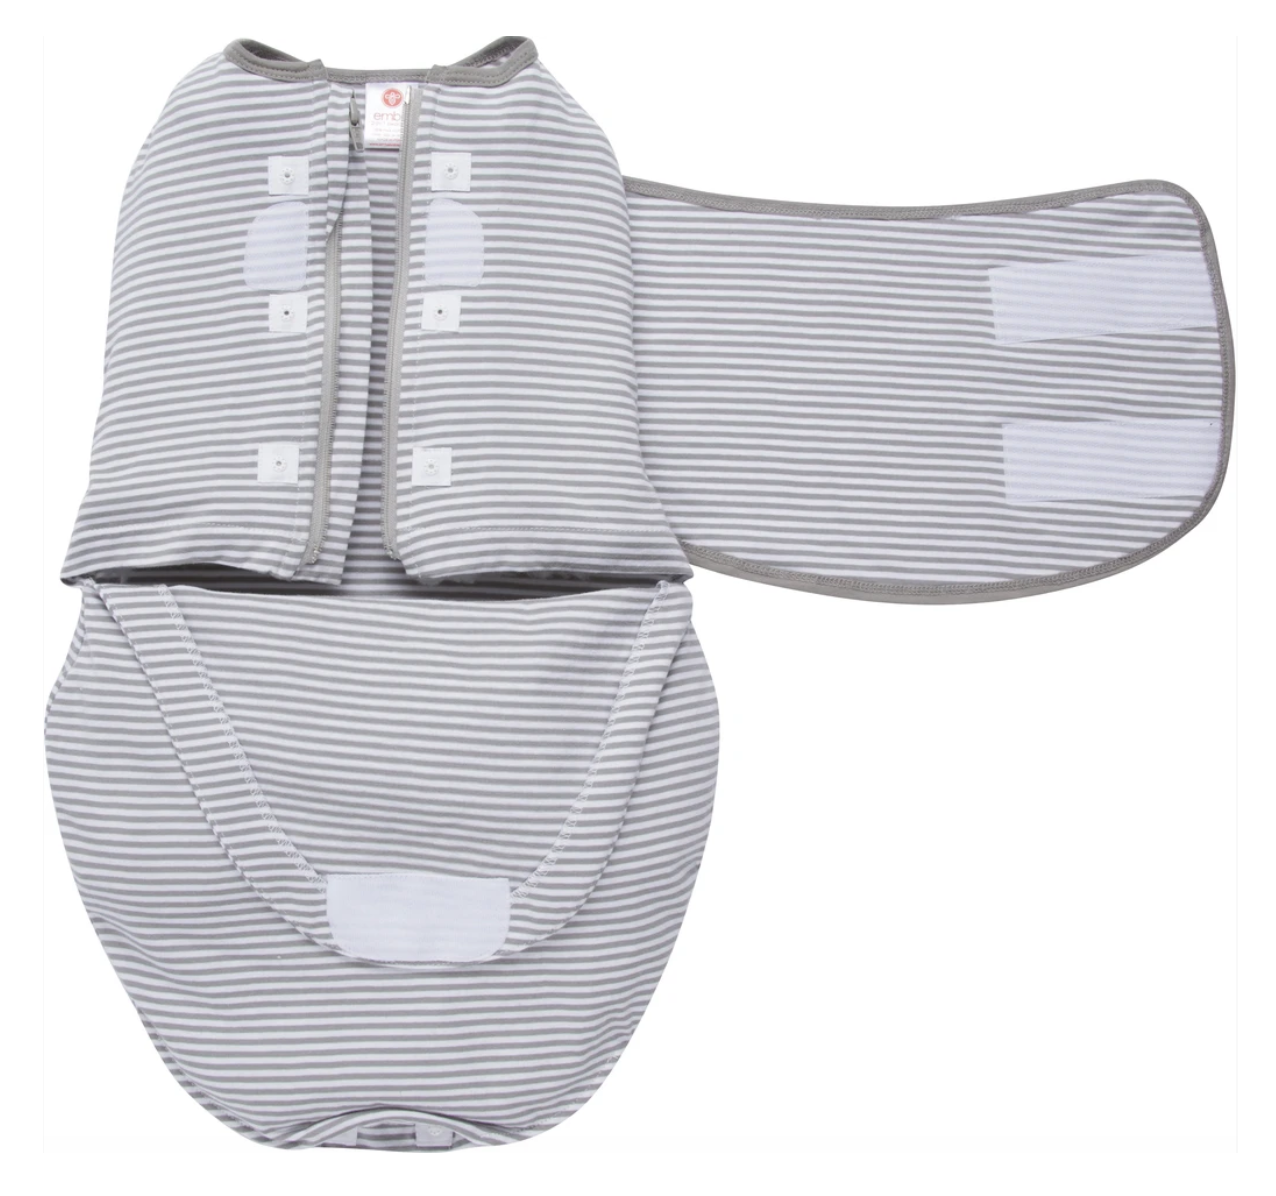 Embe Classic 2-Way Swaddle (Gray Stripes)